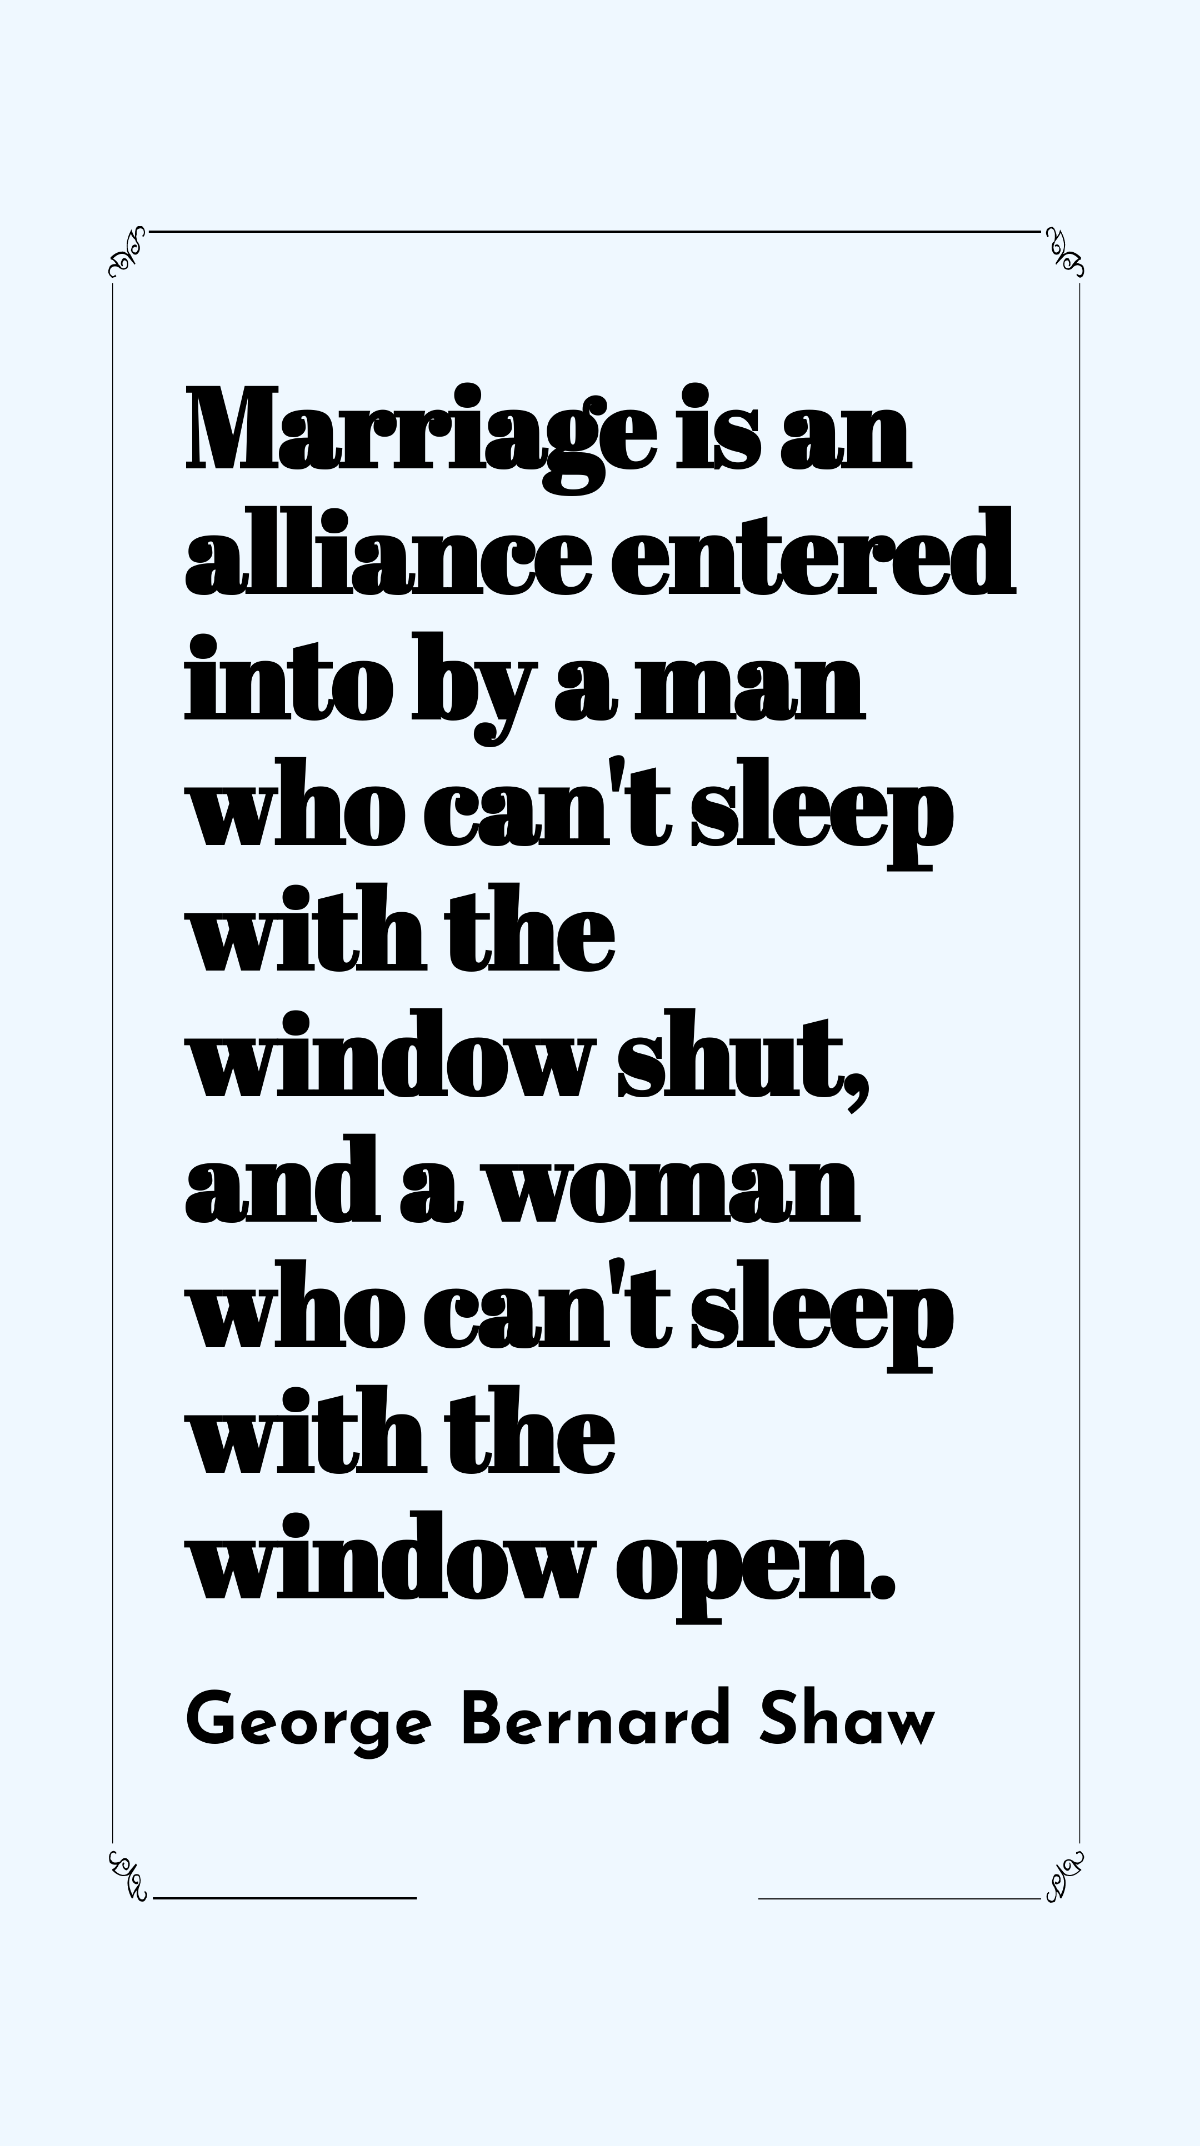 Free George Bernard Shaw - Marriage is an alliance entered into by a man who can't sleep with the window shut, and a woman who can't sleep with the window open. Template